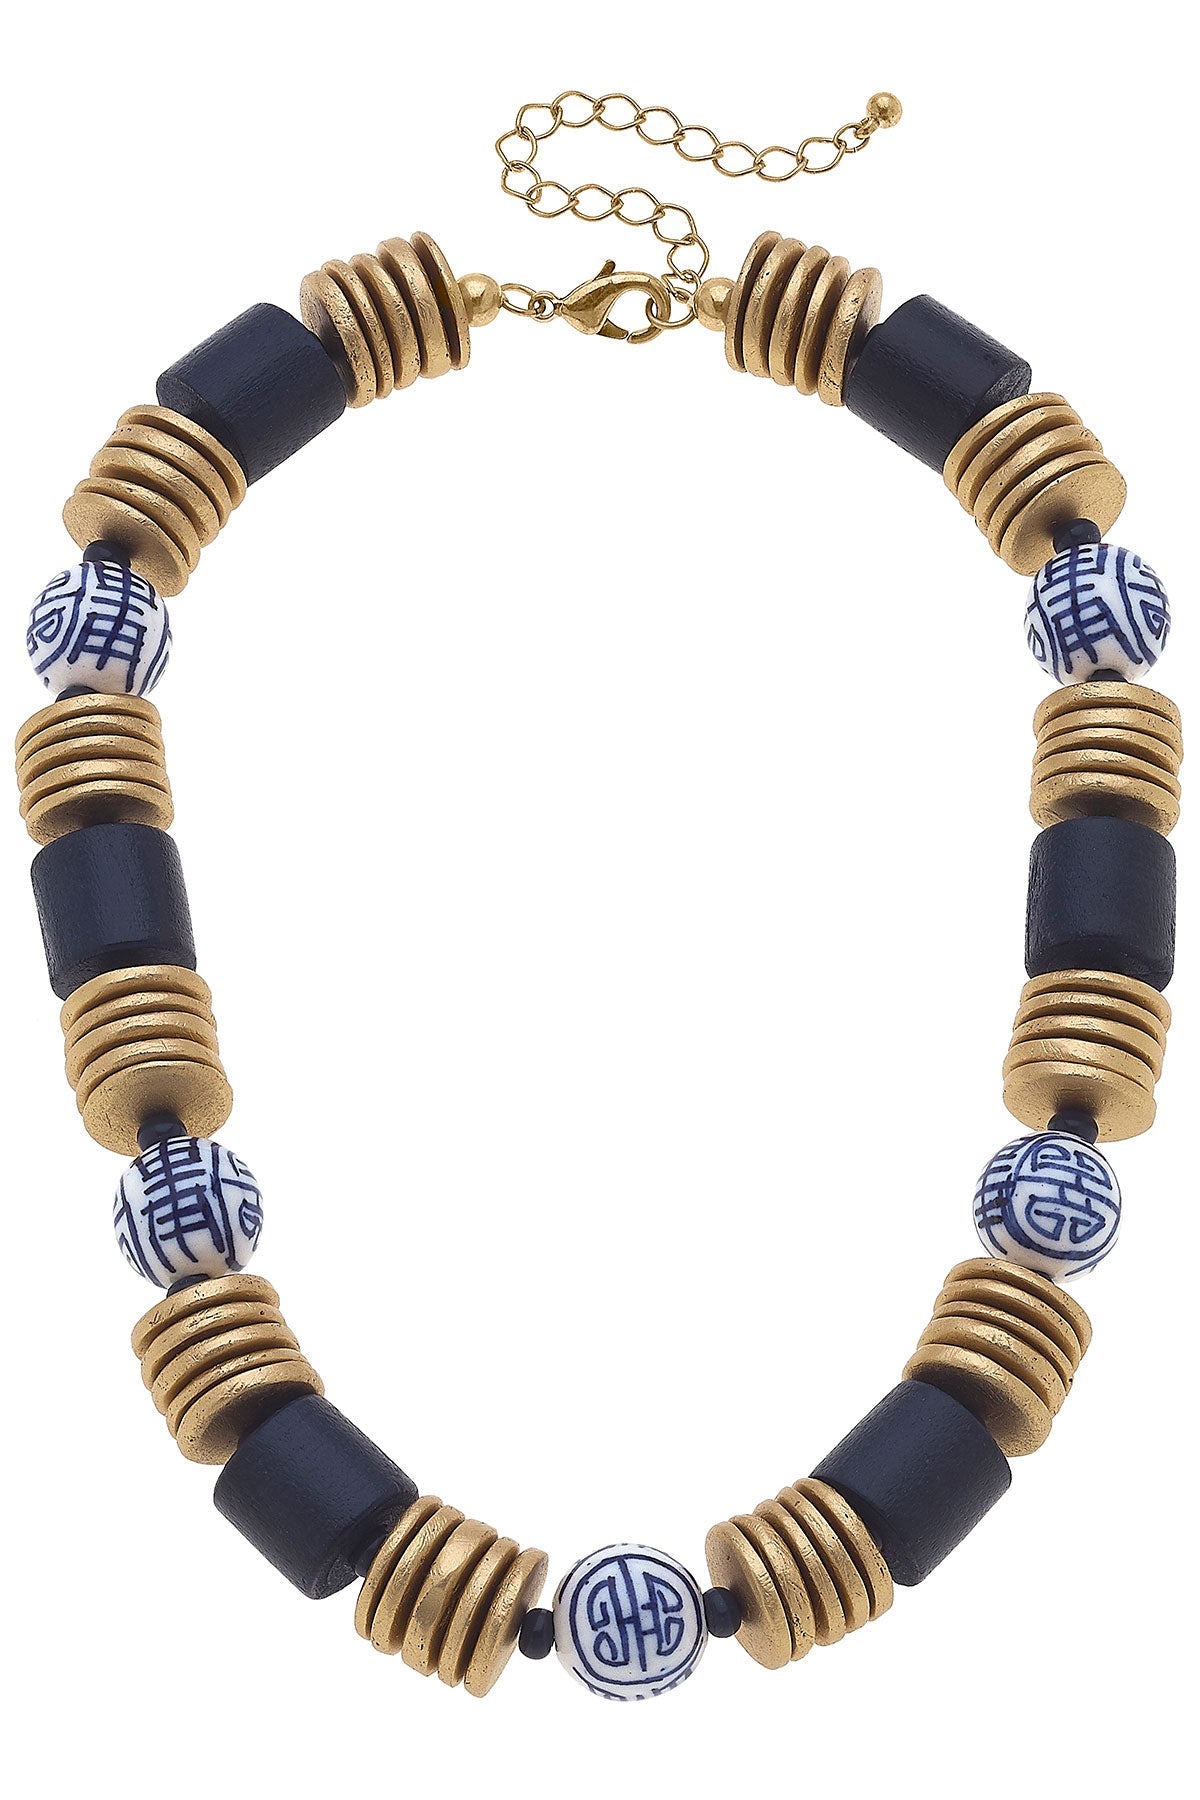 Lorelei Blue & White Chinoiserie & Painted Wood Statement Necklace in Navy